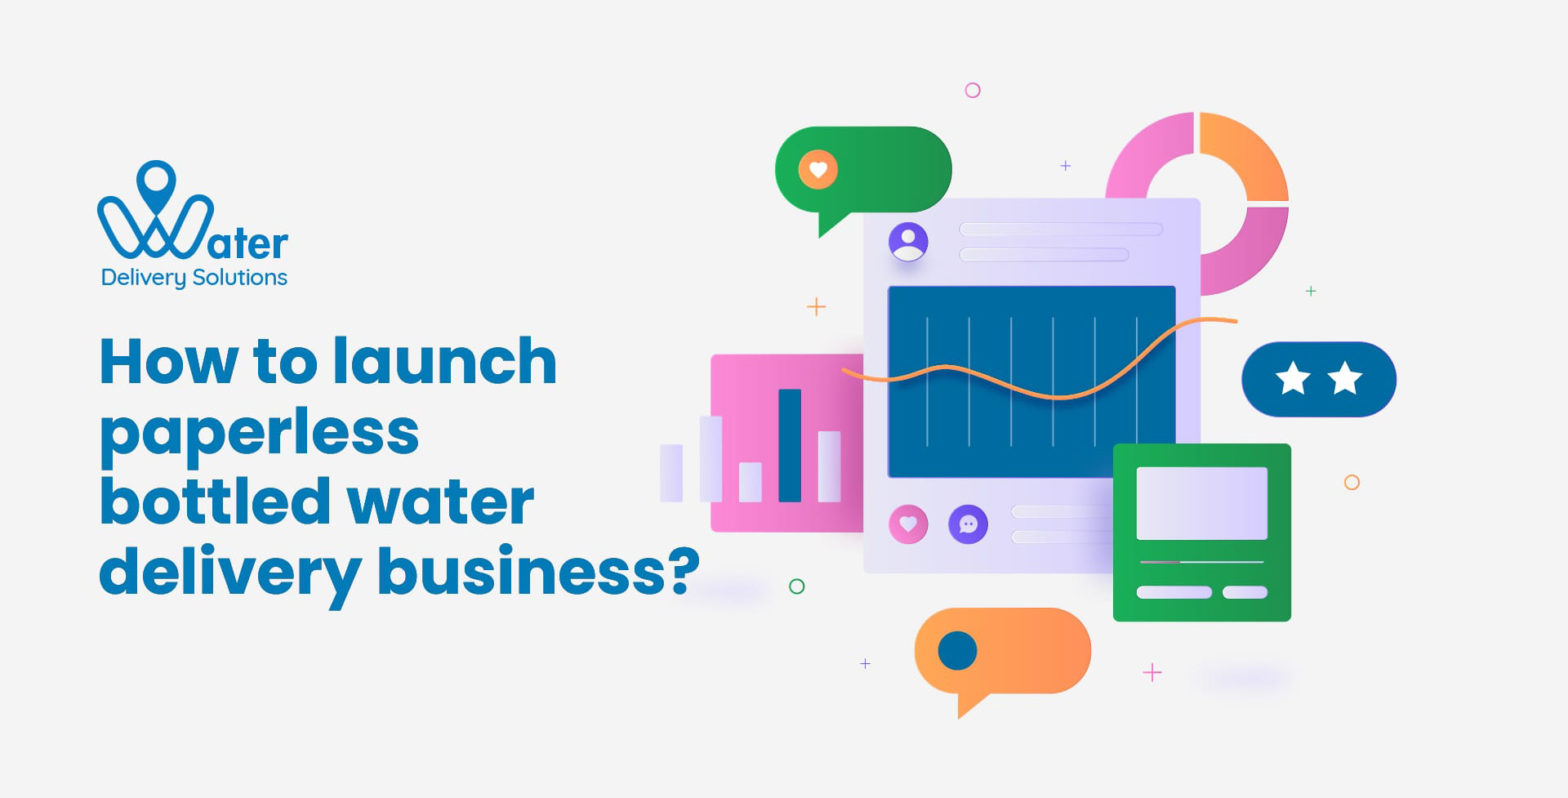 wds-founded-by-ravi-garg-website-insights-how-to-launch-paperless-water-delivery-business